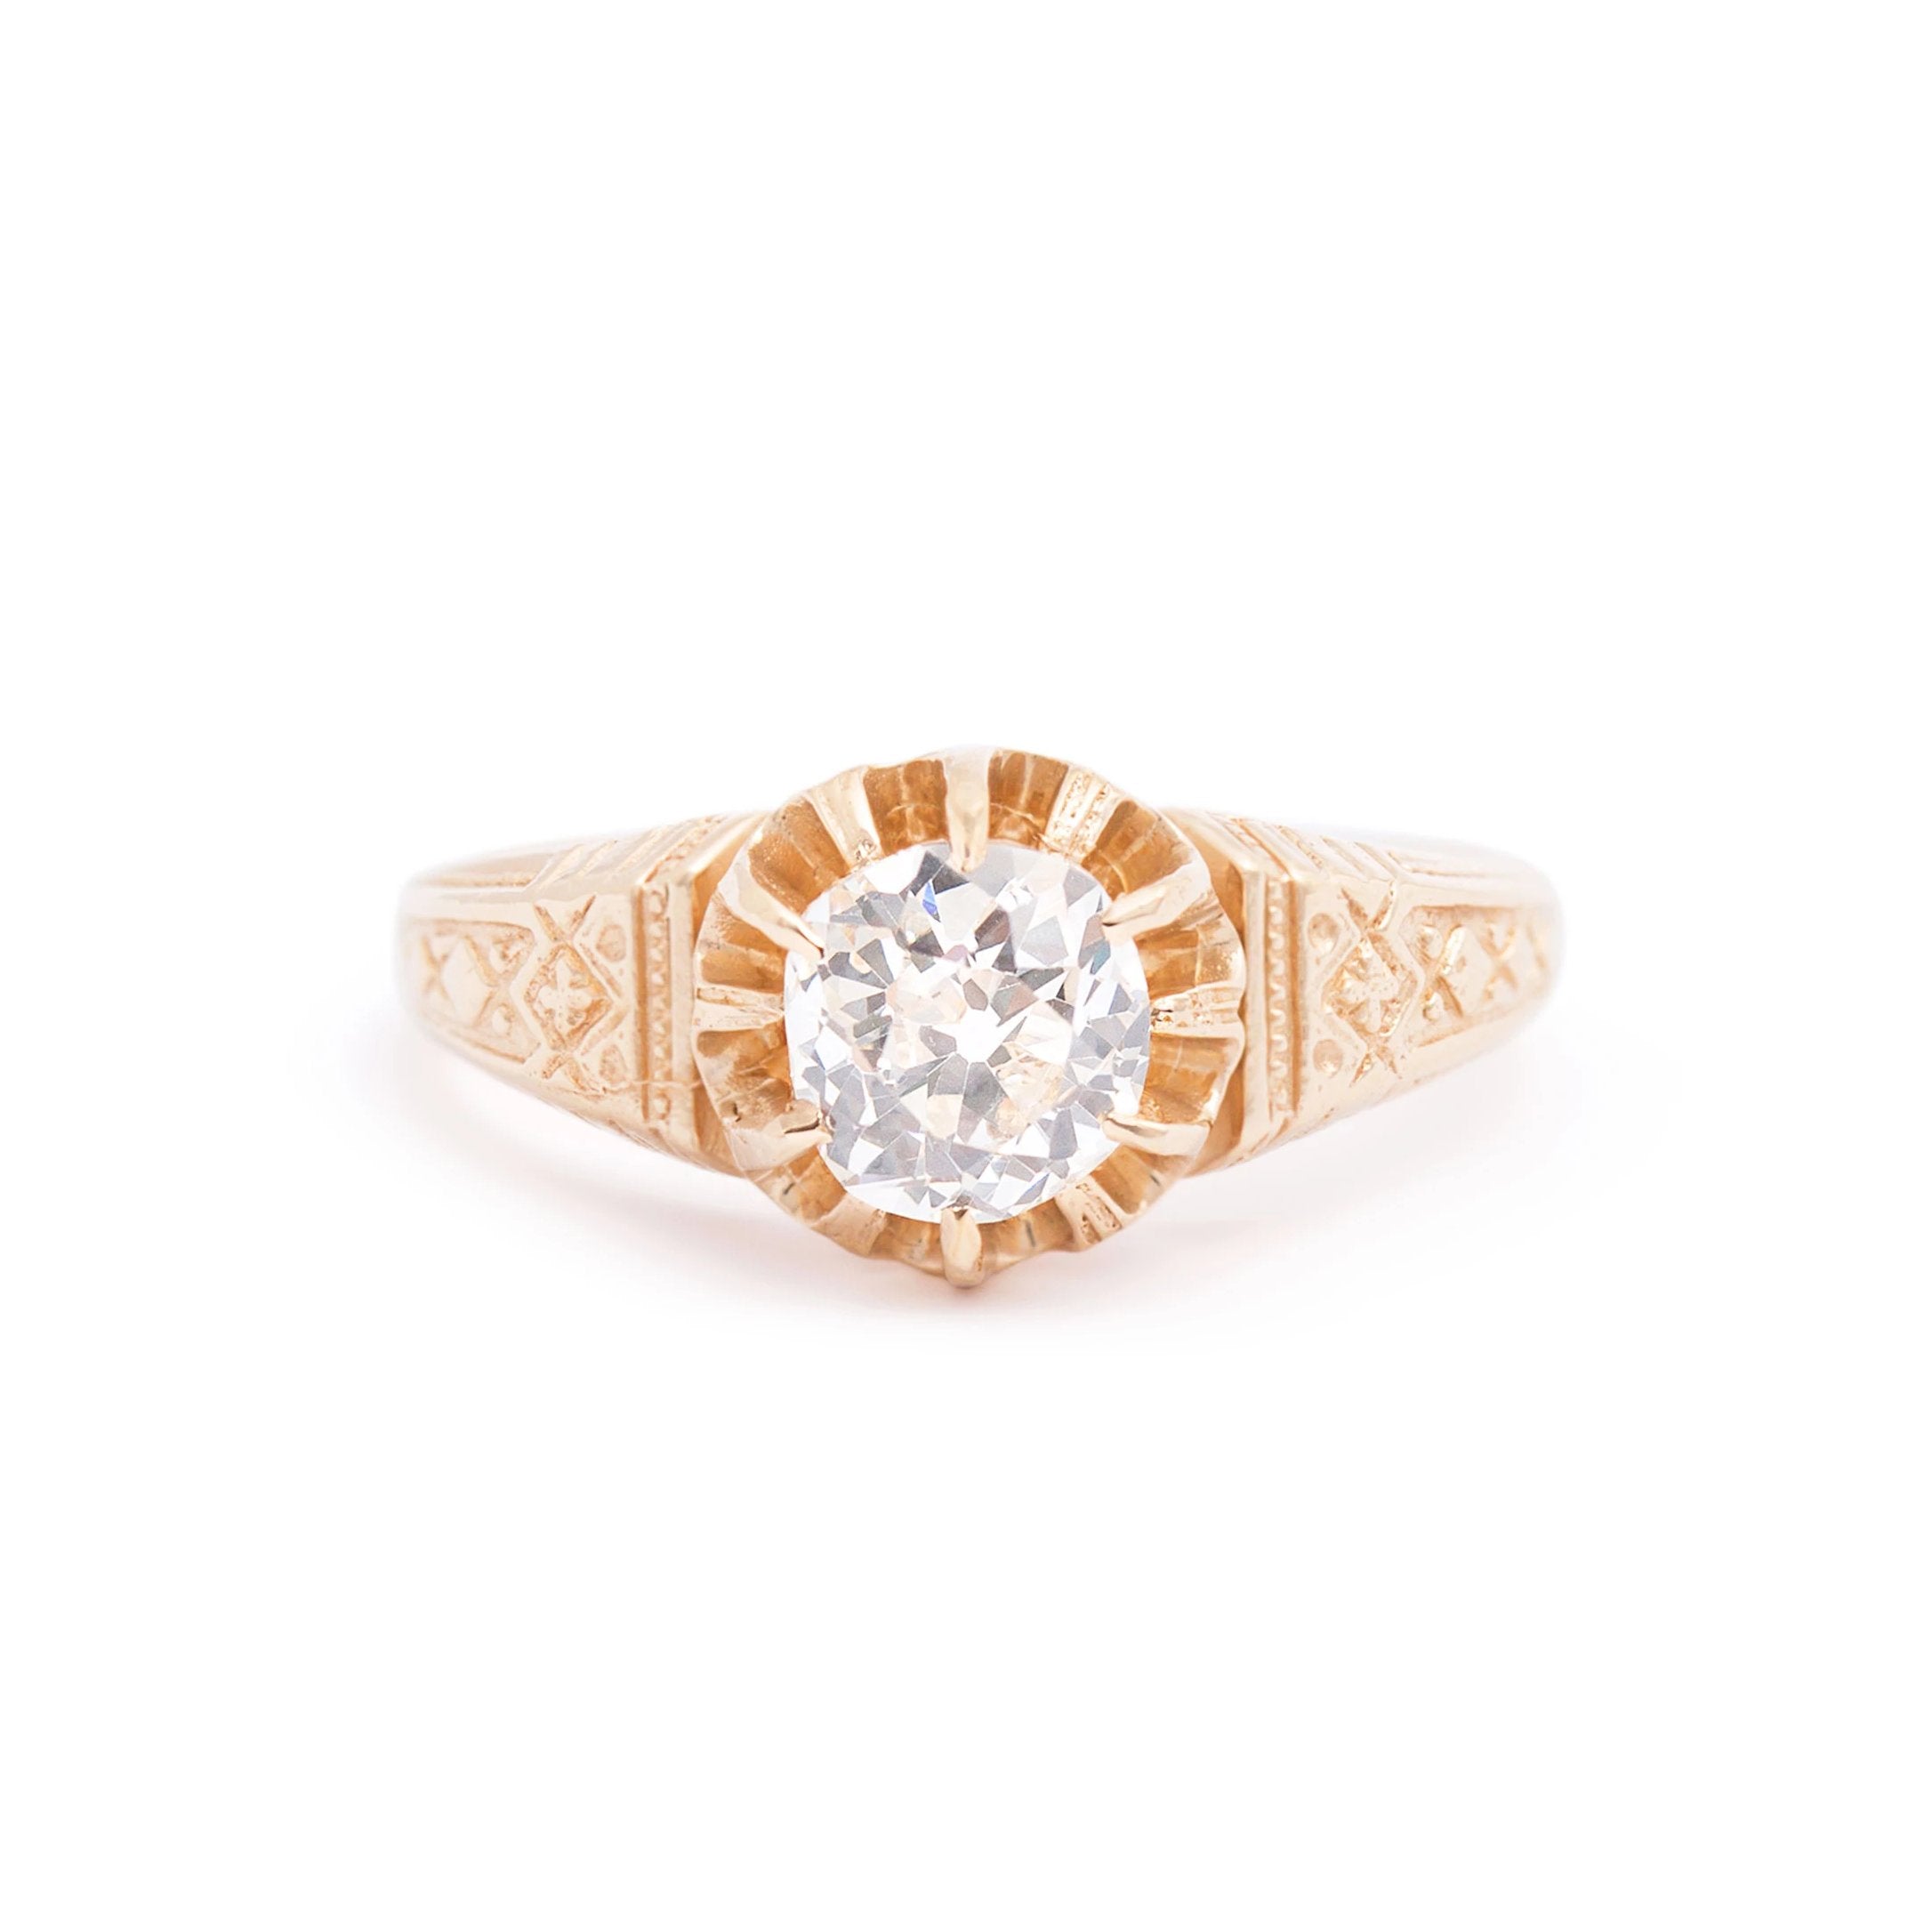 Victorian 0.85 Carat Old Mine Cut Diamond and 14k Gold Ring